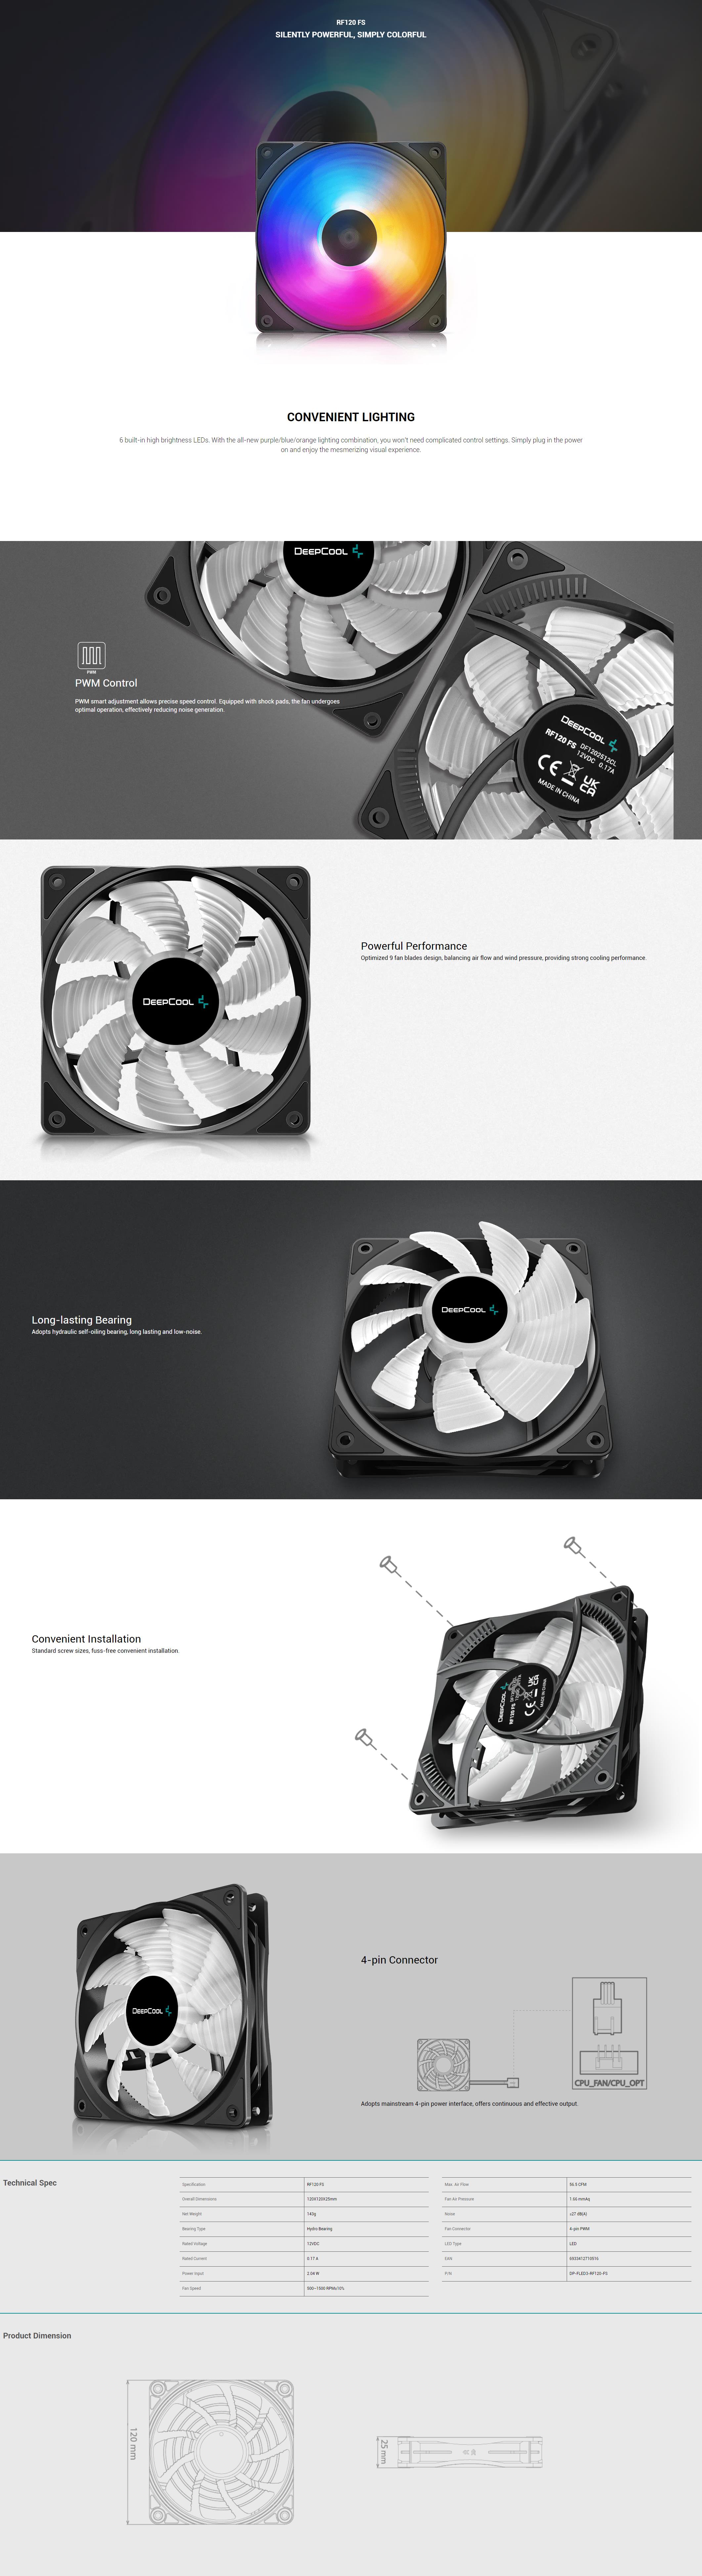 A large marketing image providing additional information about the product DeepCool RF120 FS 120mm Case Fan - Additional alt info not provided